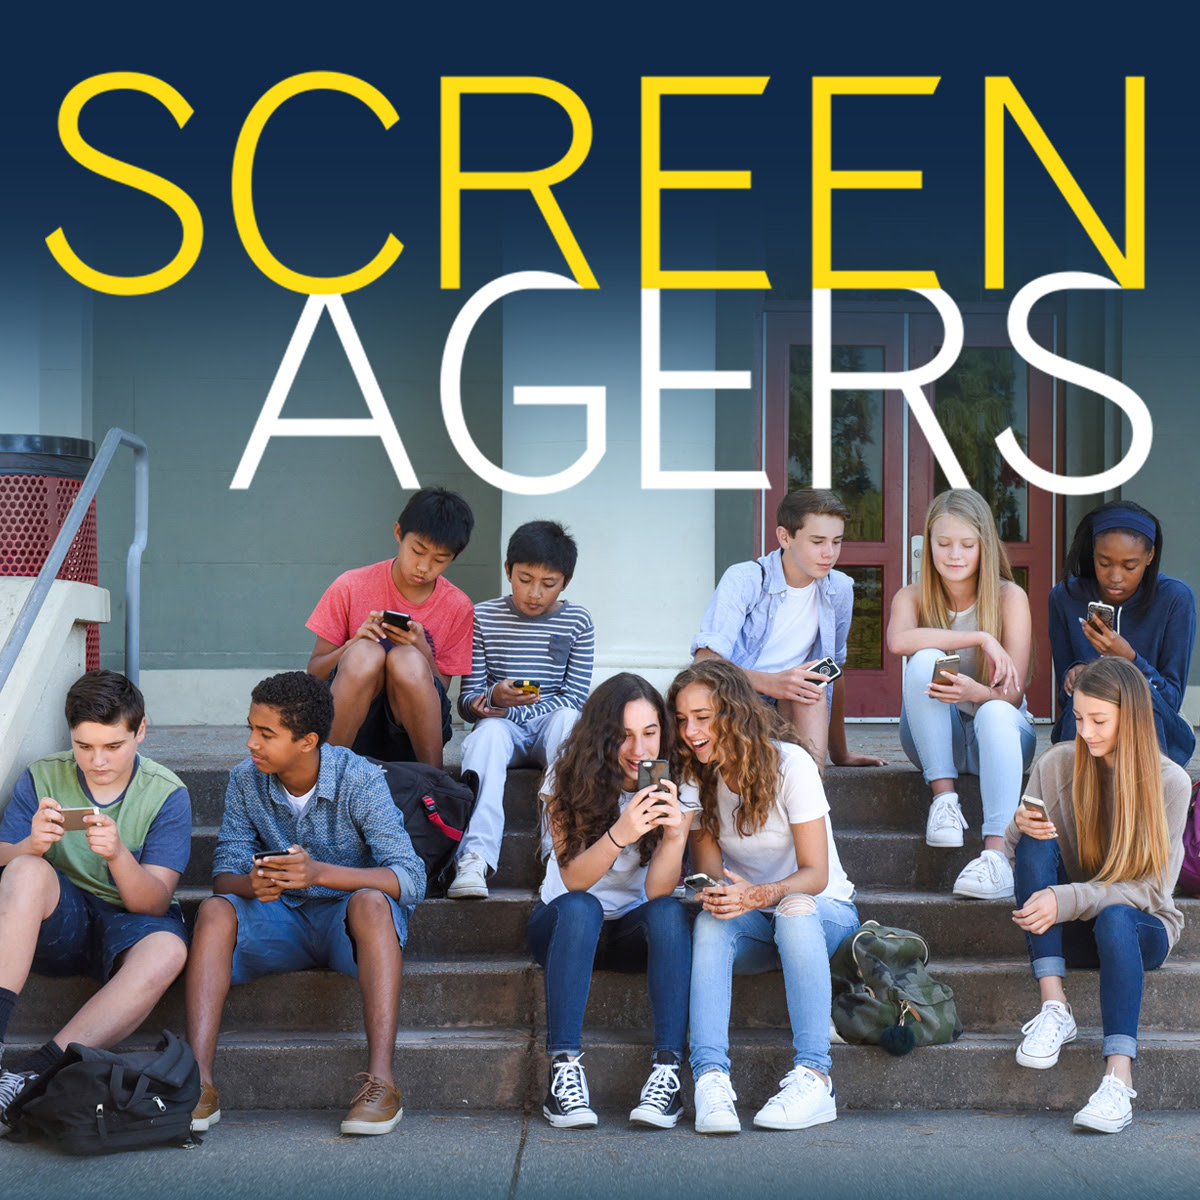 Screenagers Film Presented By Dodge Center Ministerial